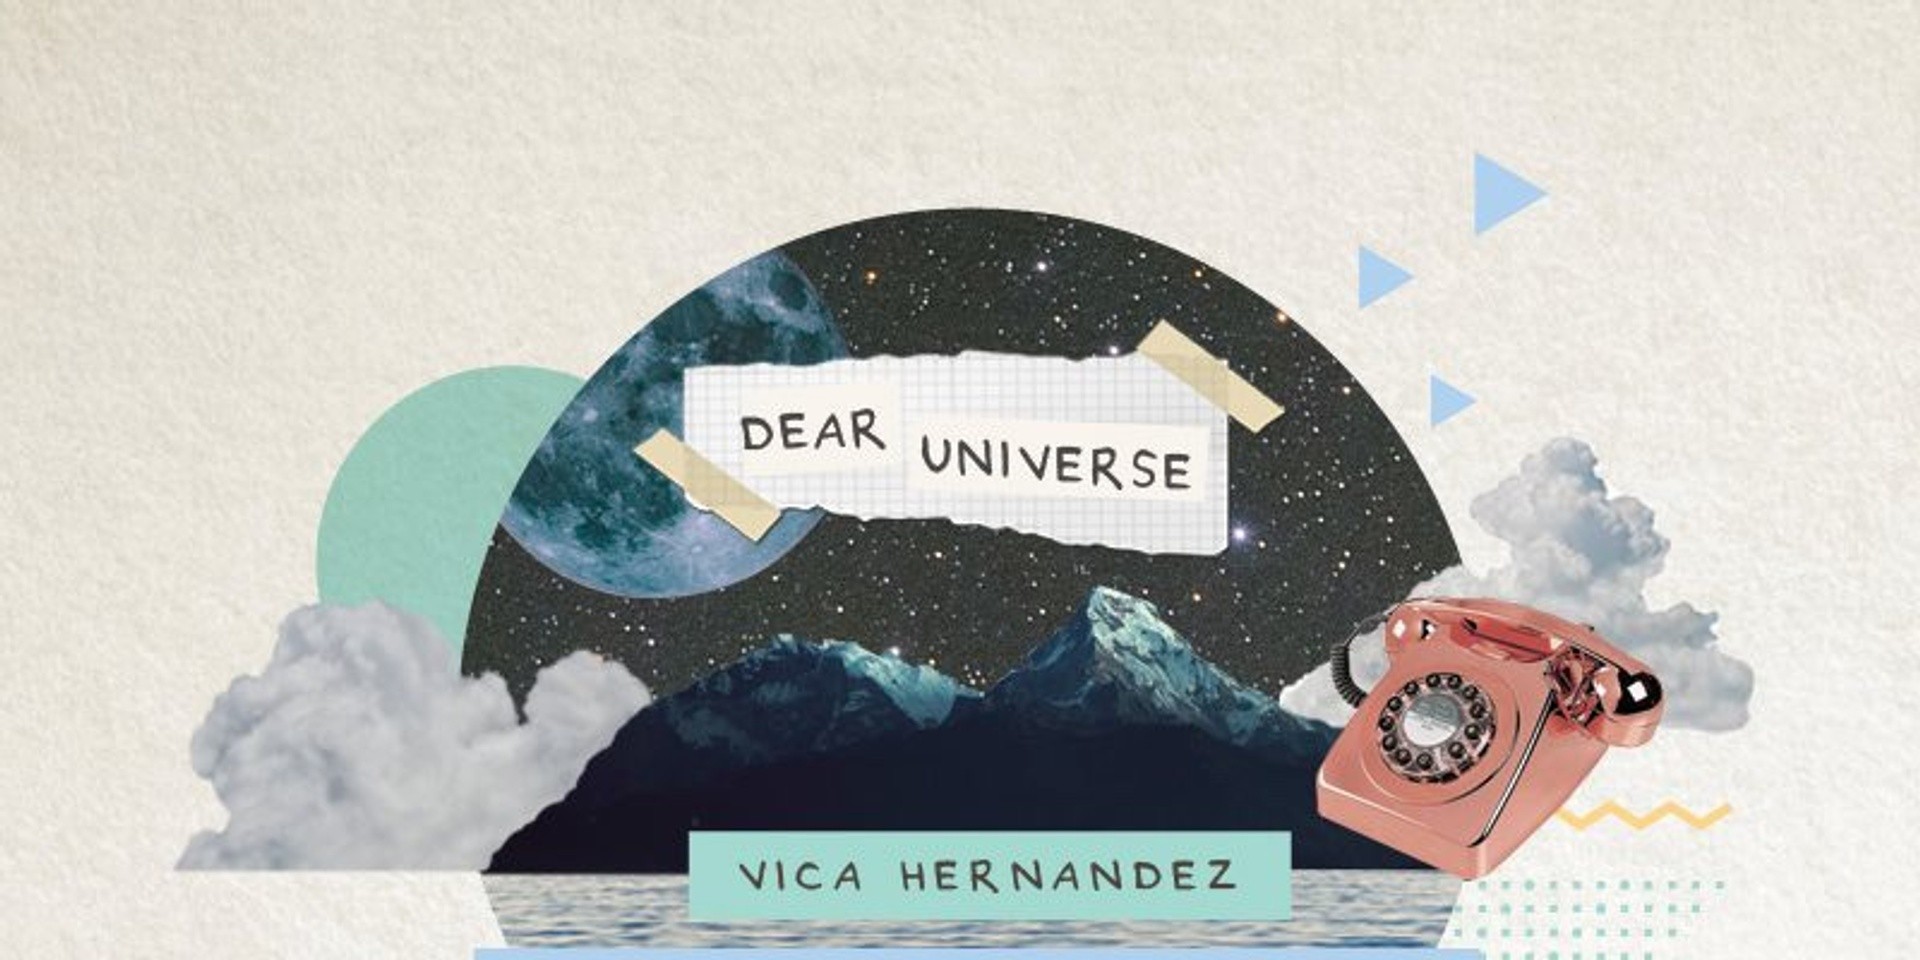 Vica Hernandez to launch first solo EP, Dear Universe